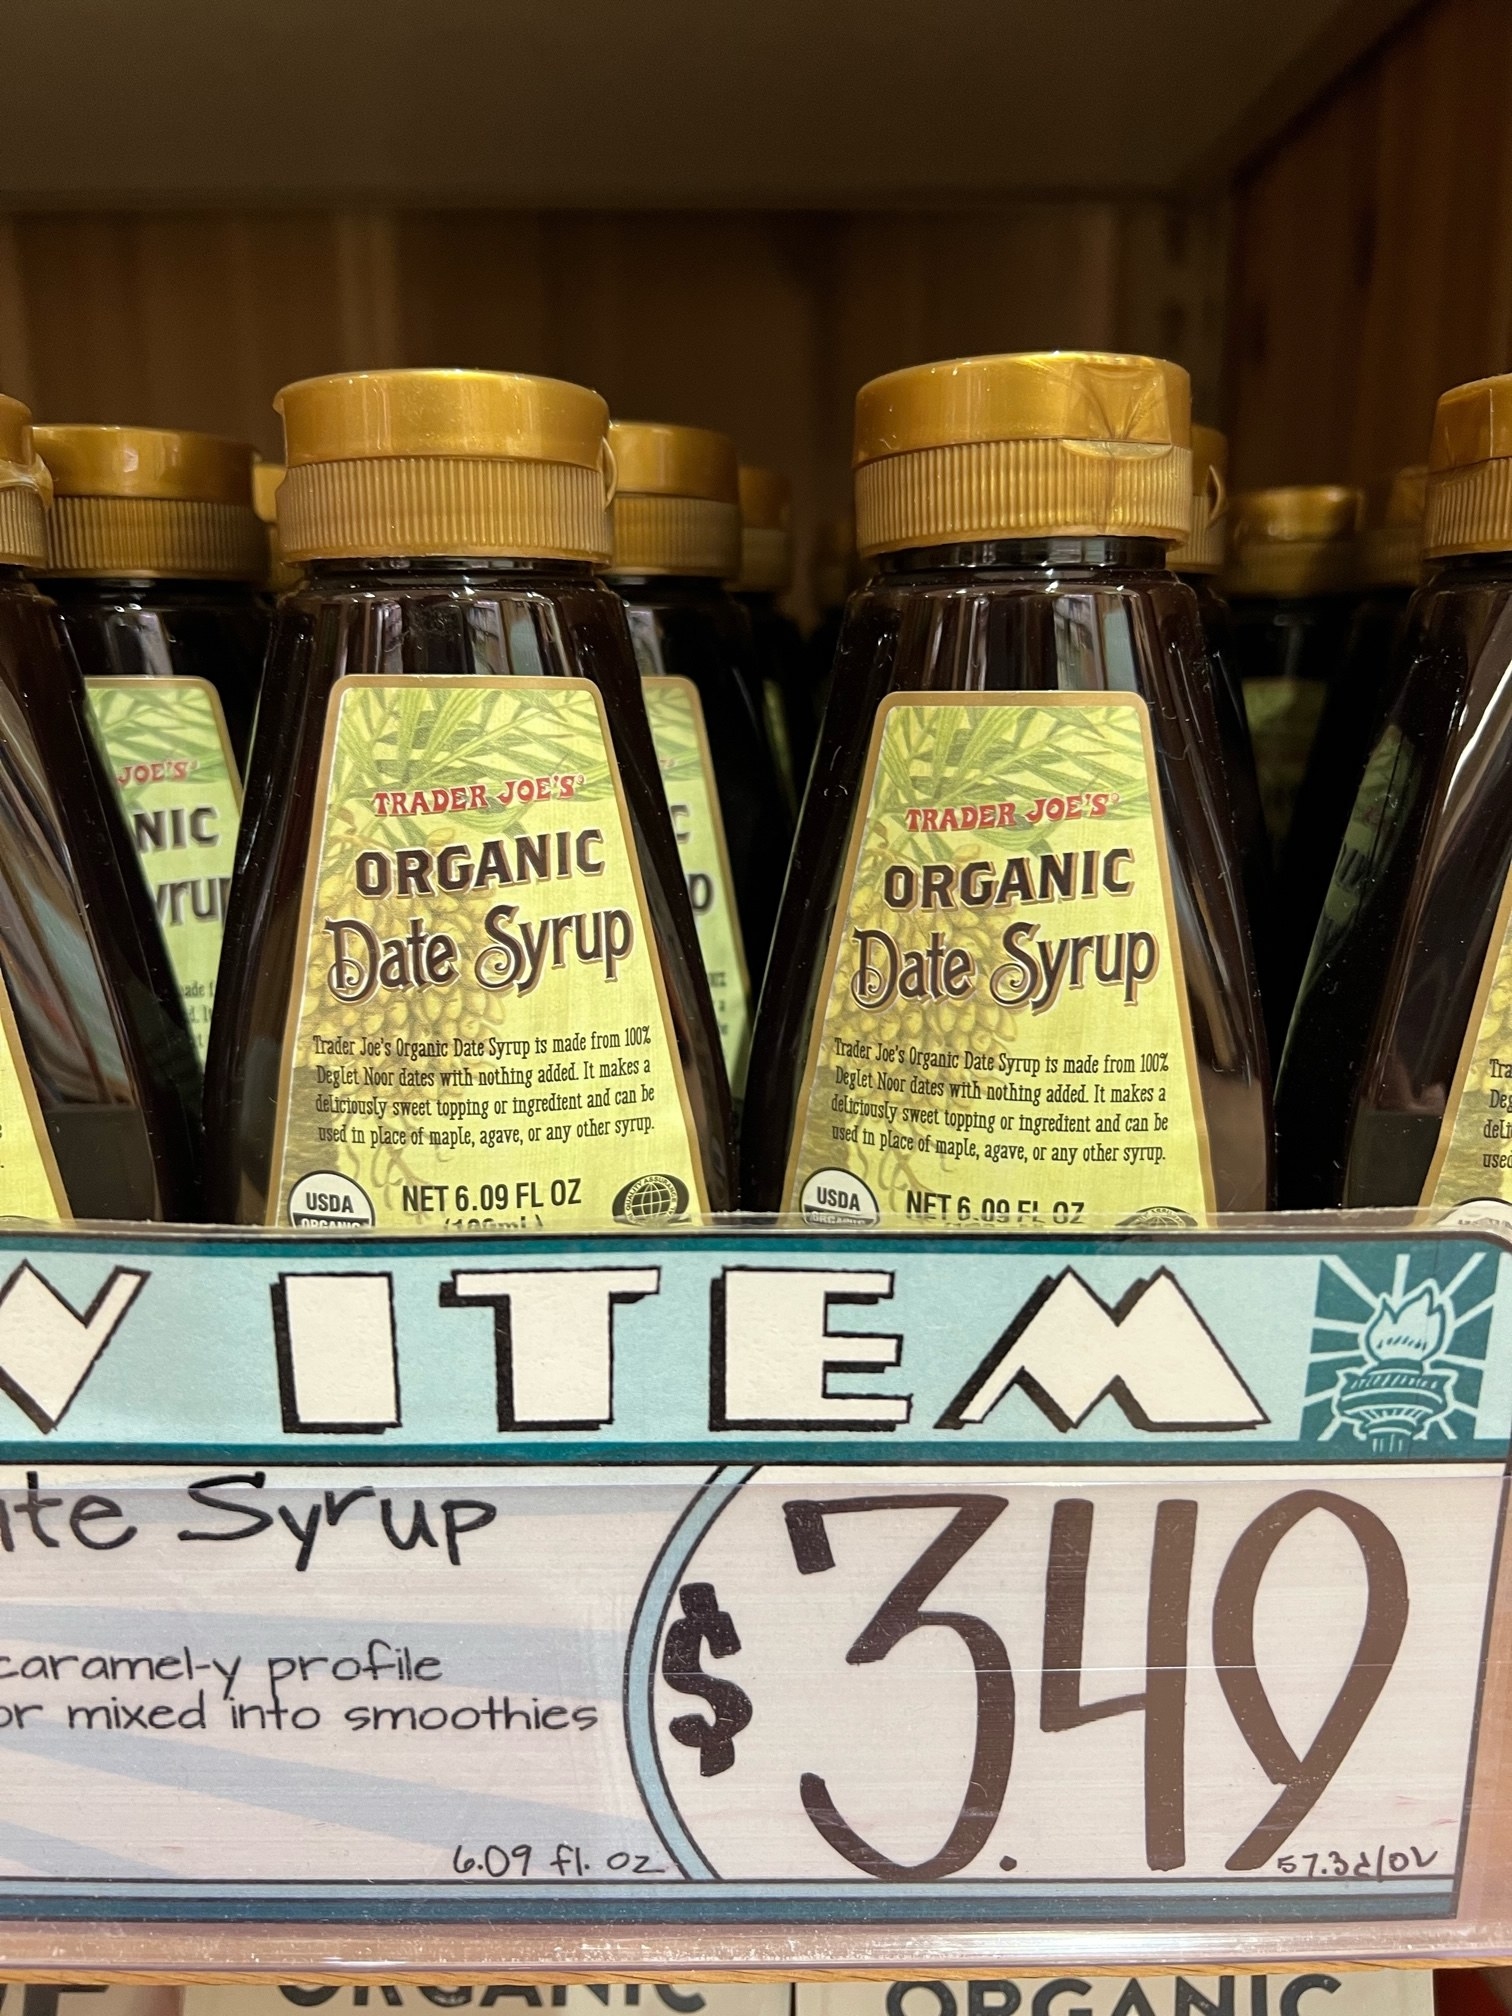 A bottle of Organic Date Syrup